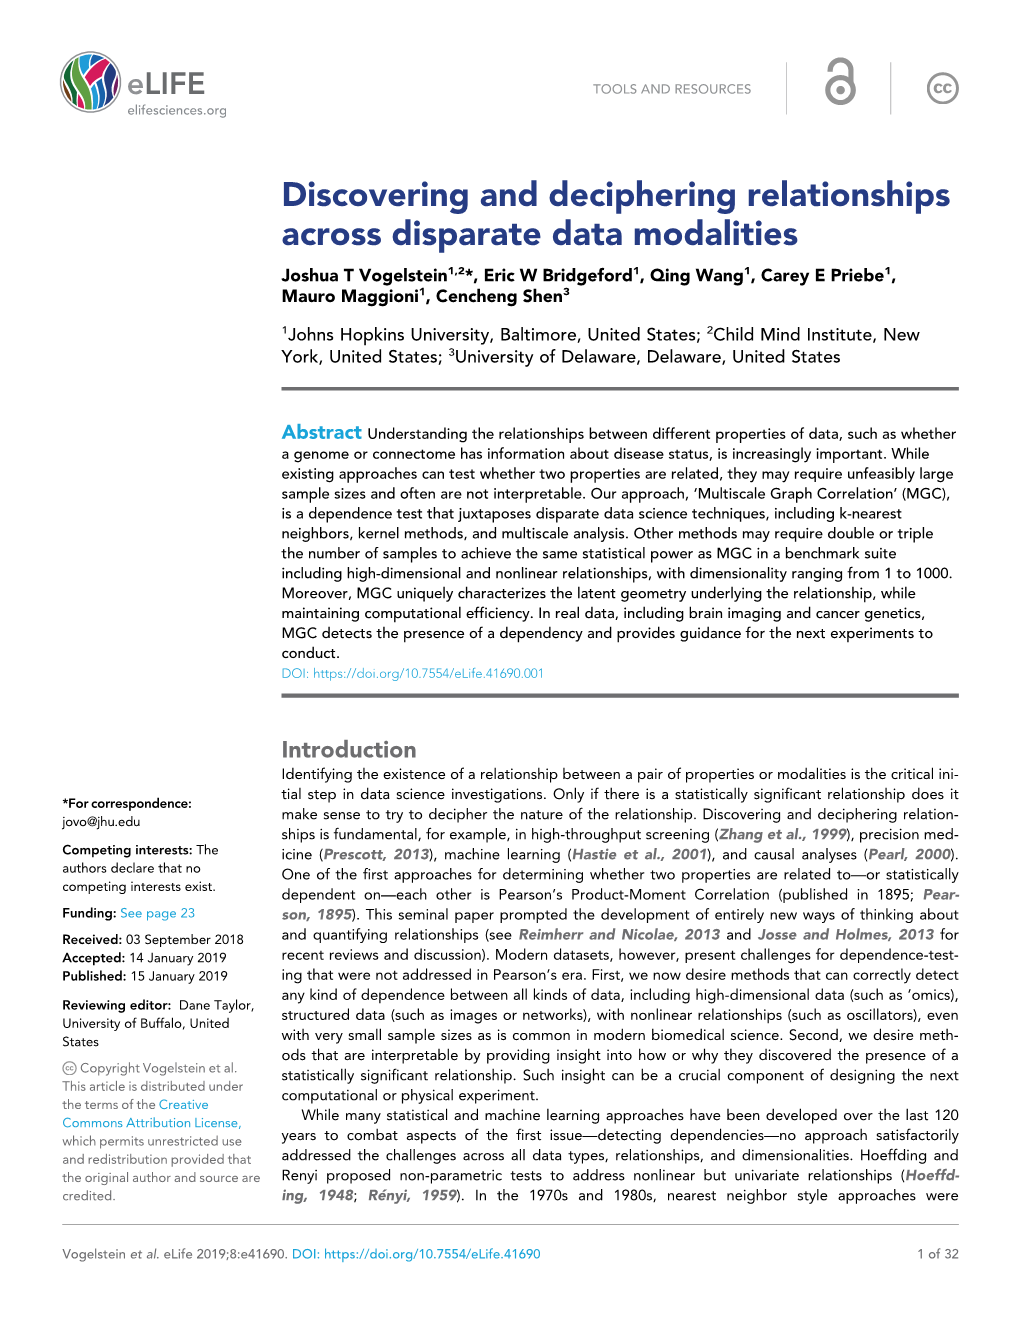 Discovering and Deciphering Relationships Across Disparate Data